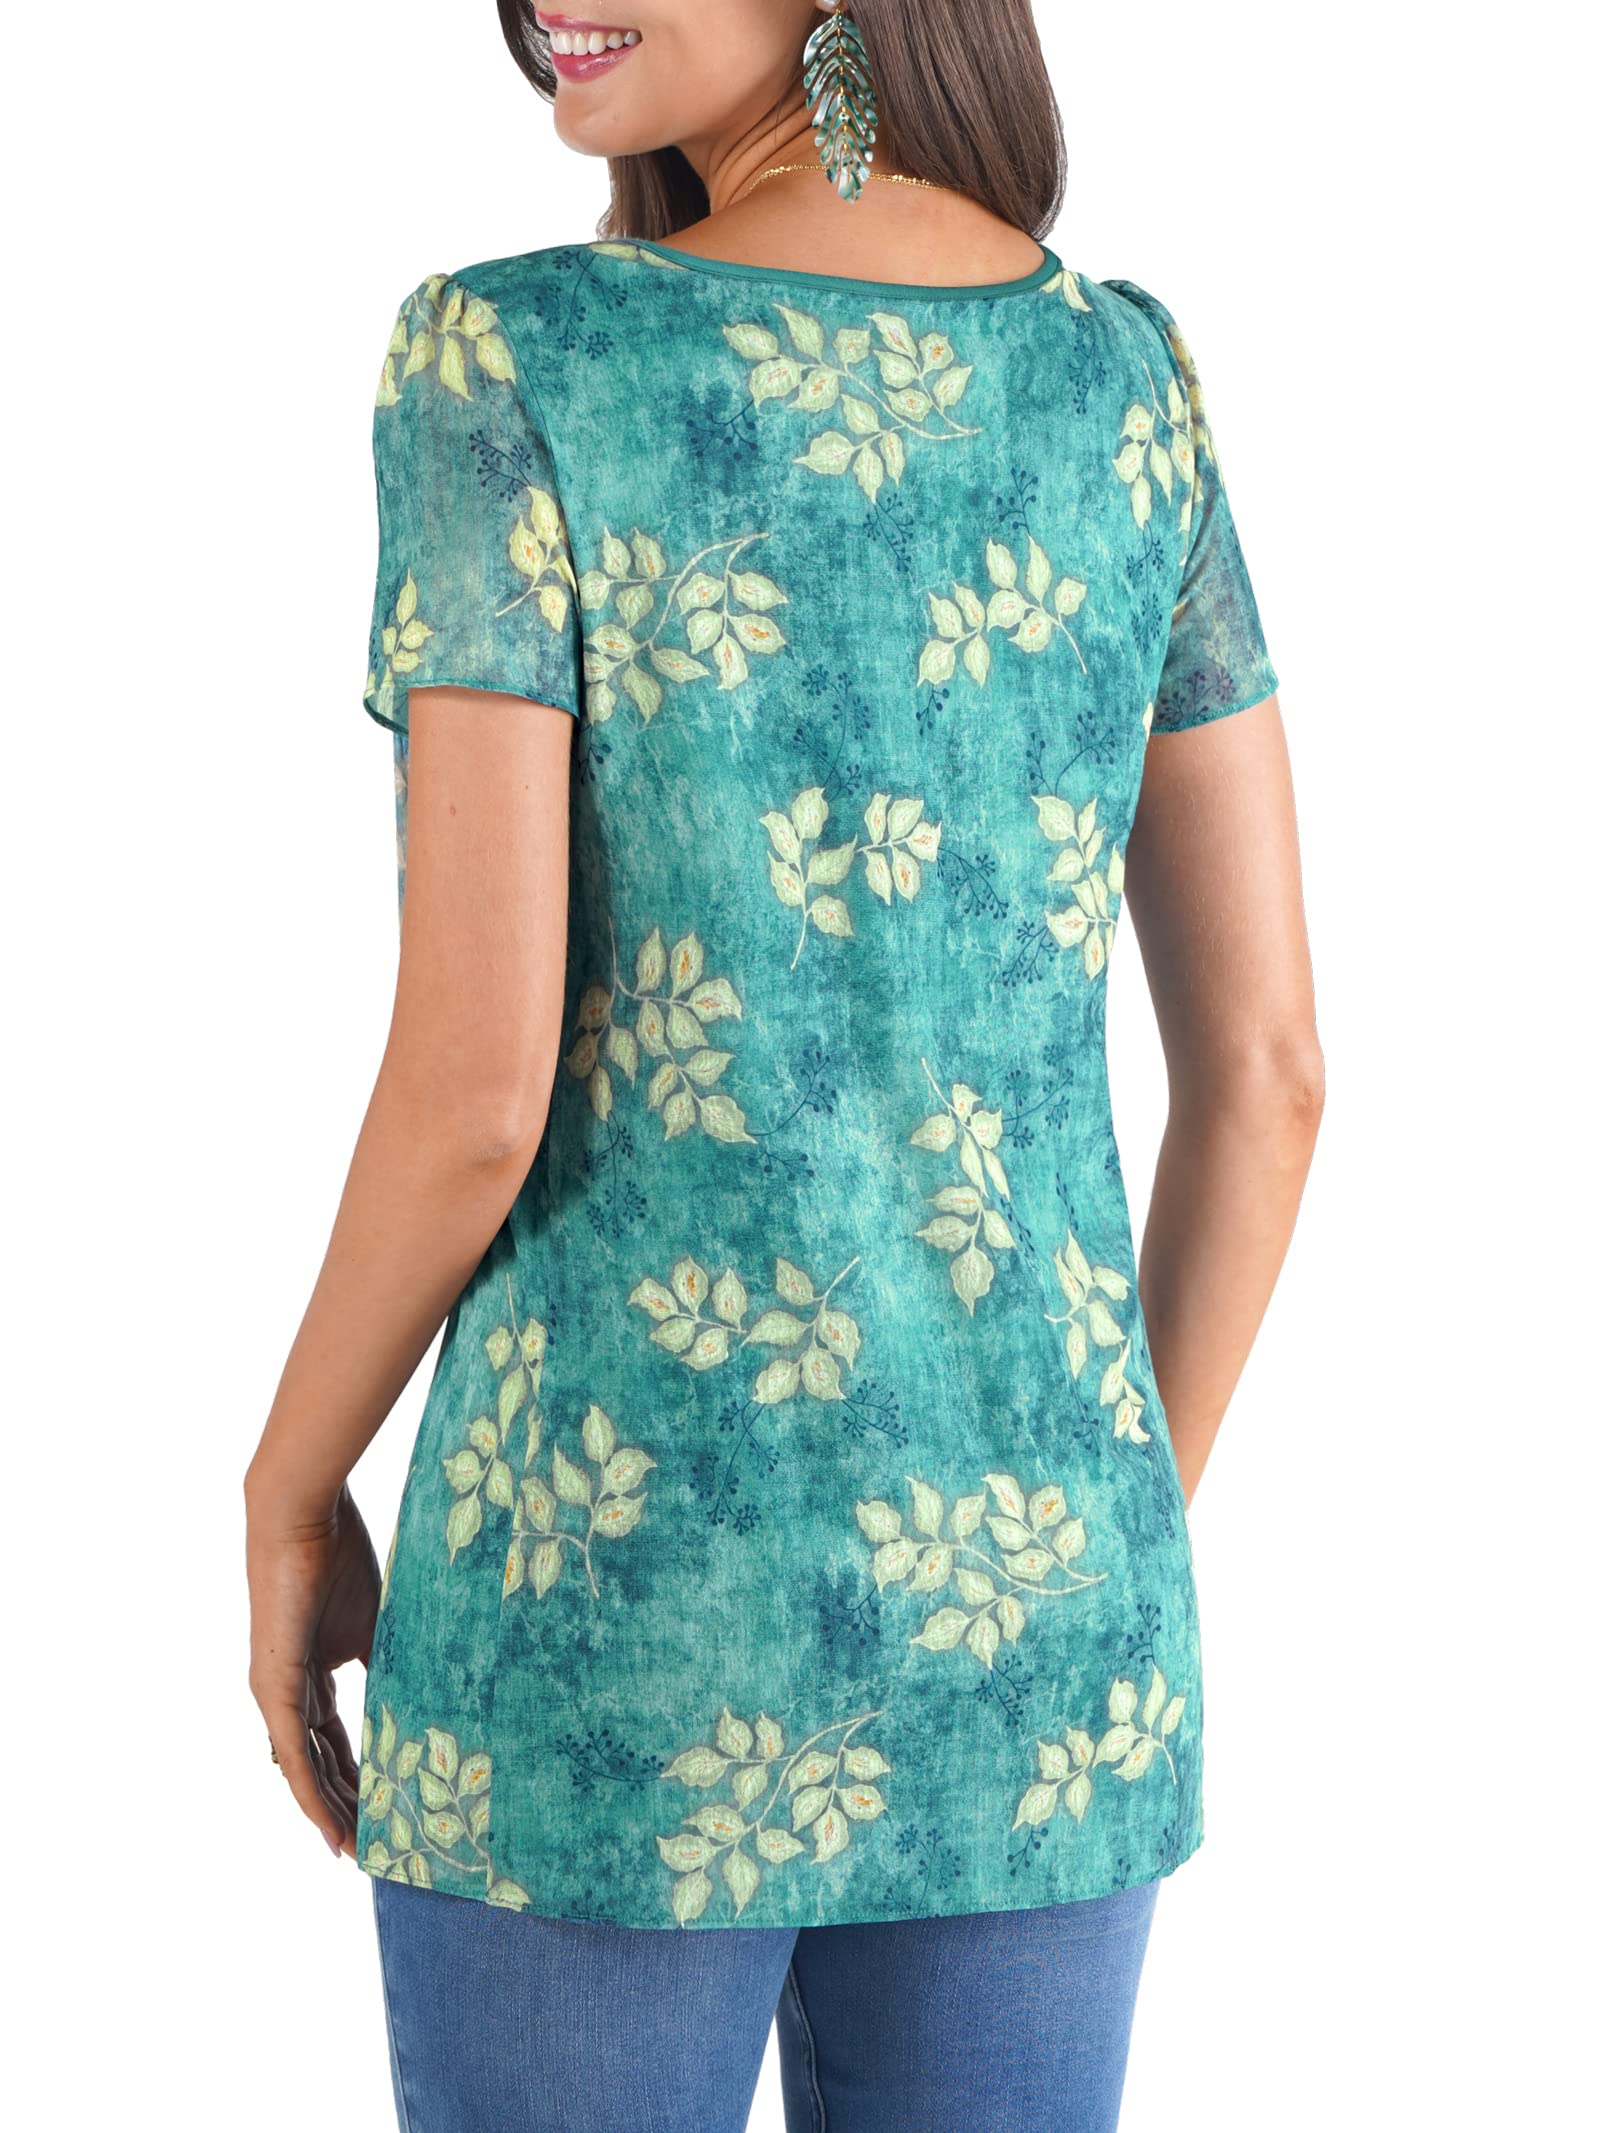 BAISHENGGT Teal Floral Womens Summer Casual Tunics Tops Floral Pleated Front Short Sleeve Flowy Mesh Layers Shirts Blouses